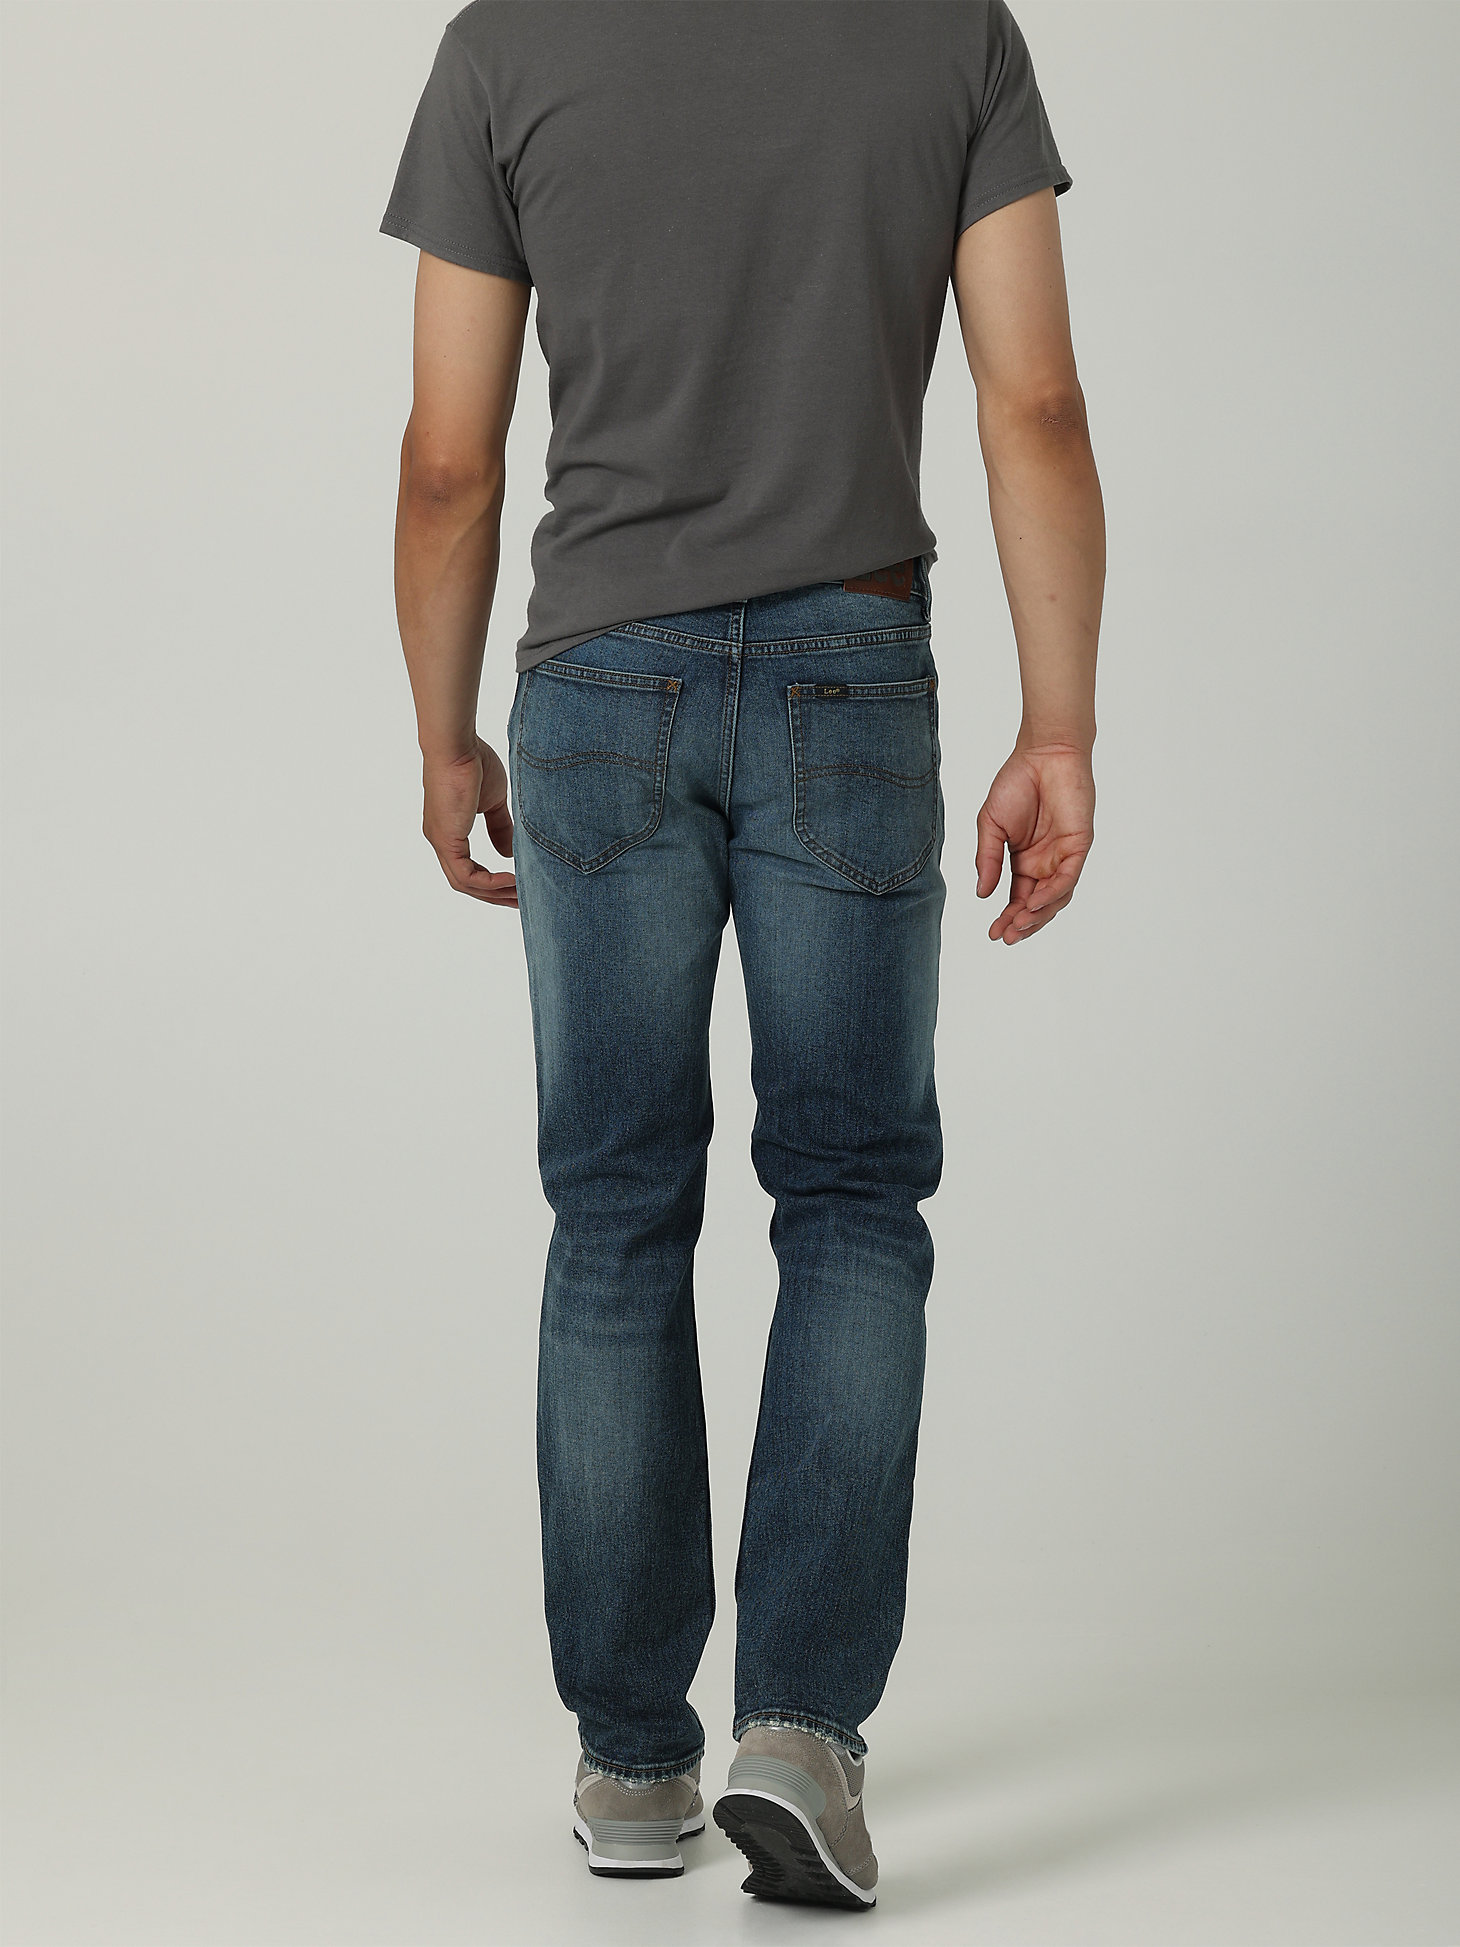 Men's Relaxed Fit Tapered Jean in Mikheil alternative view 1